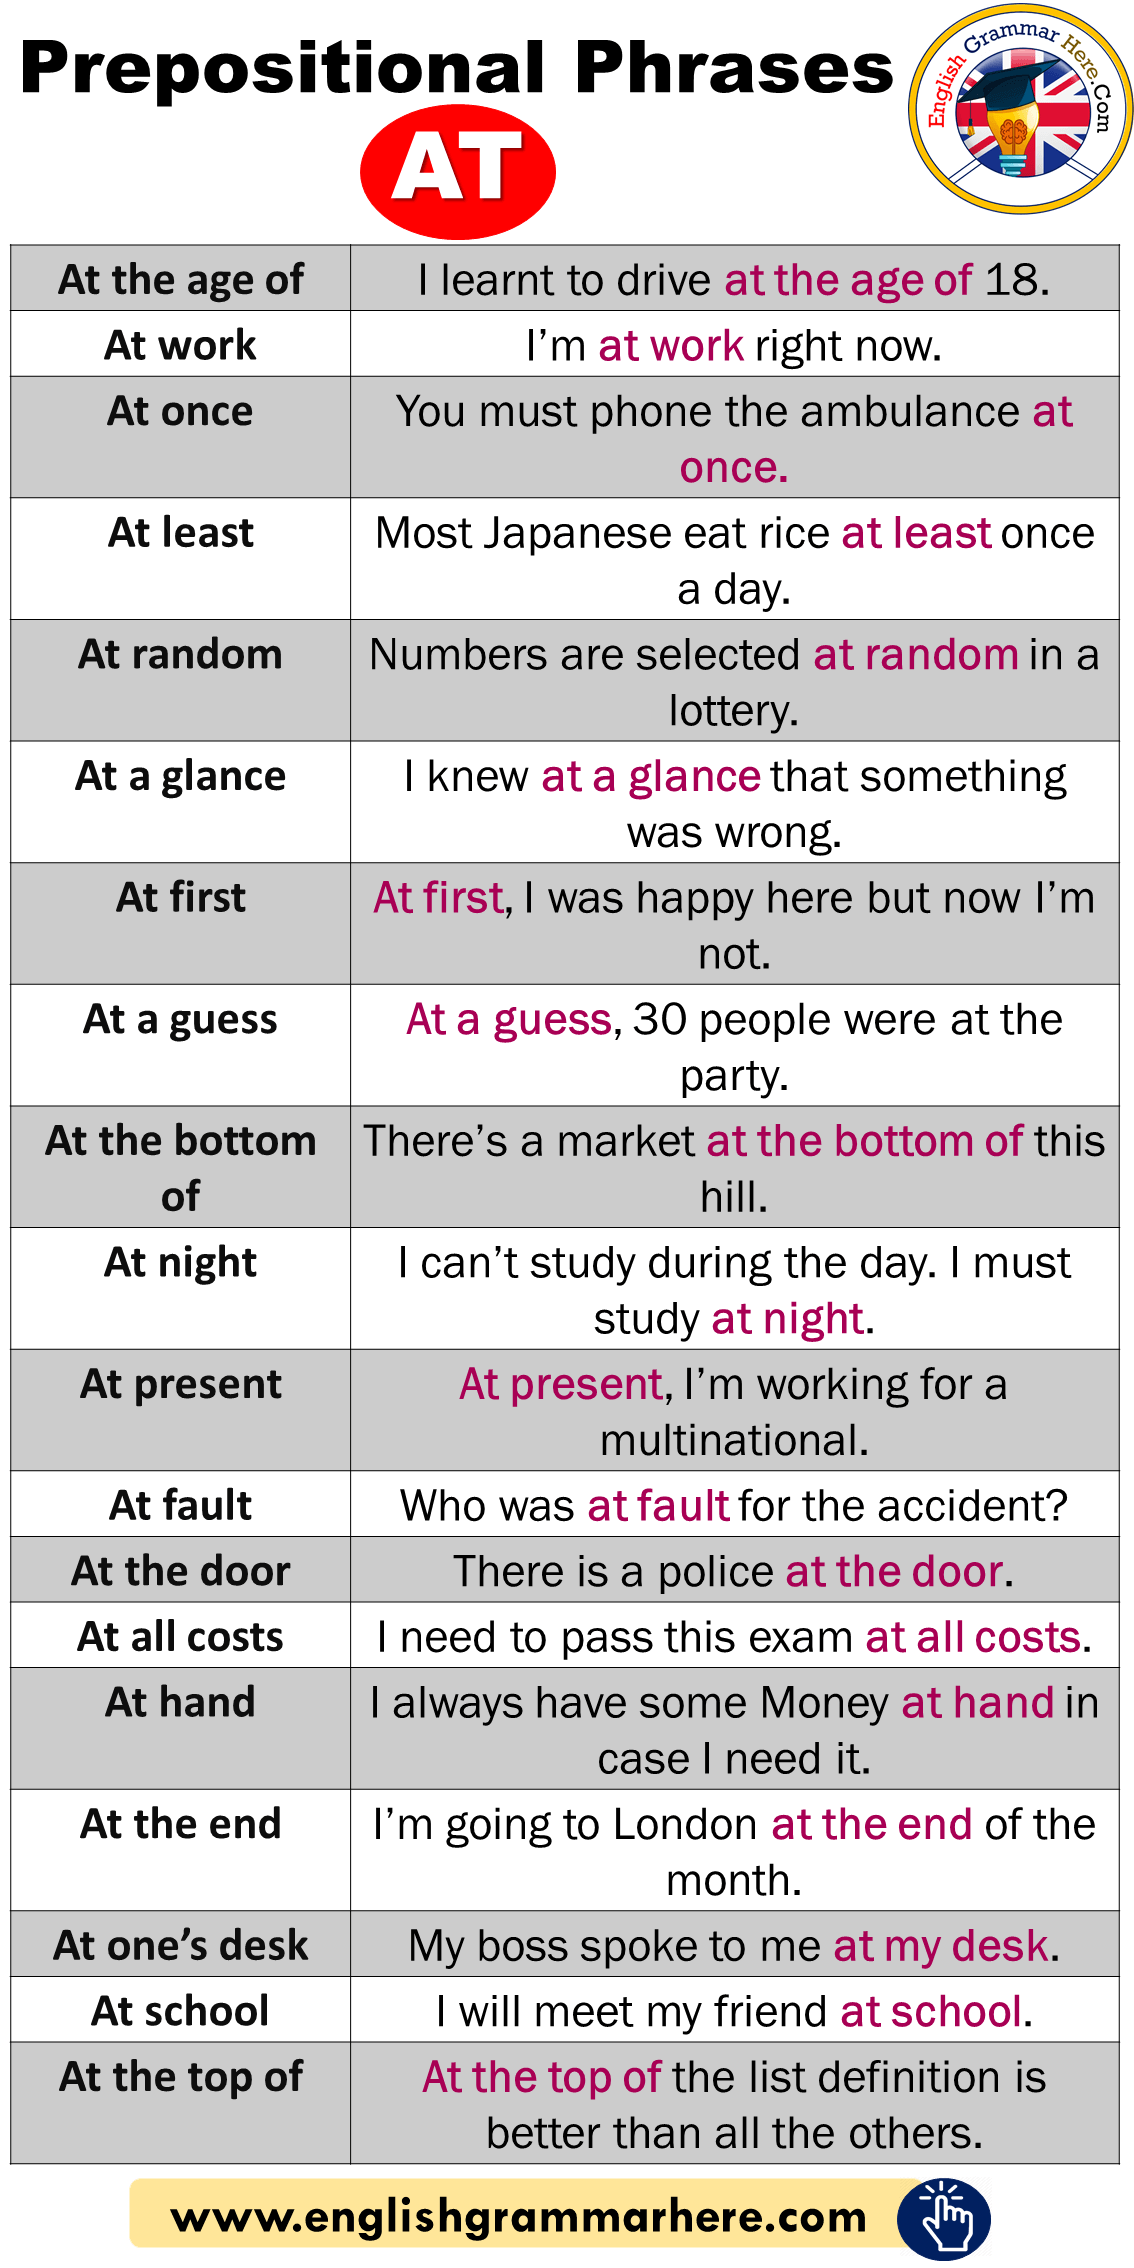 English Phrases List, Prepositional Phrases AT, Example Sentences